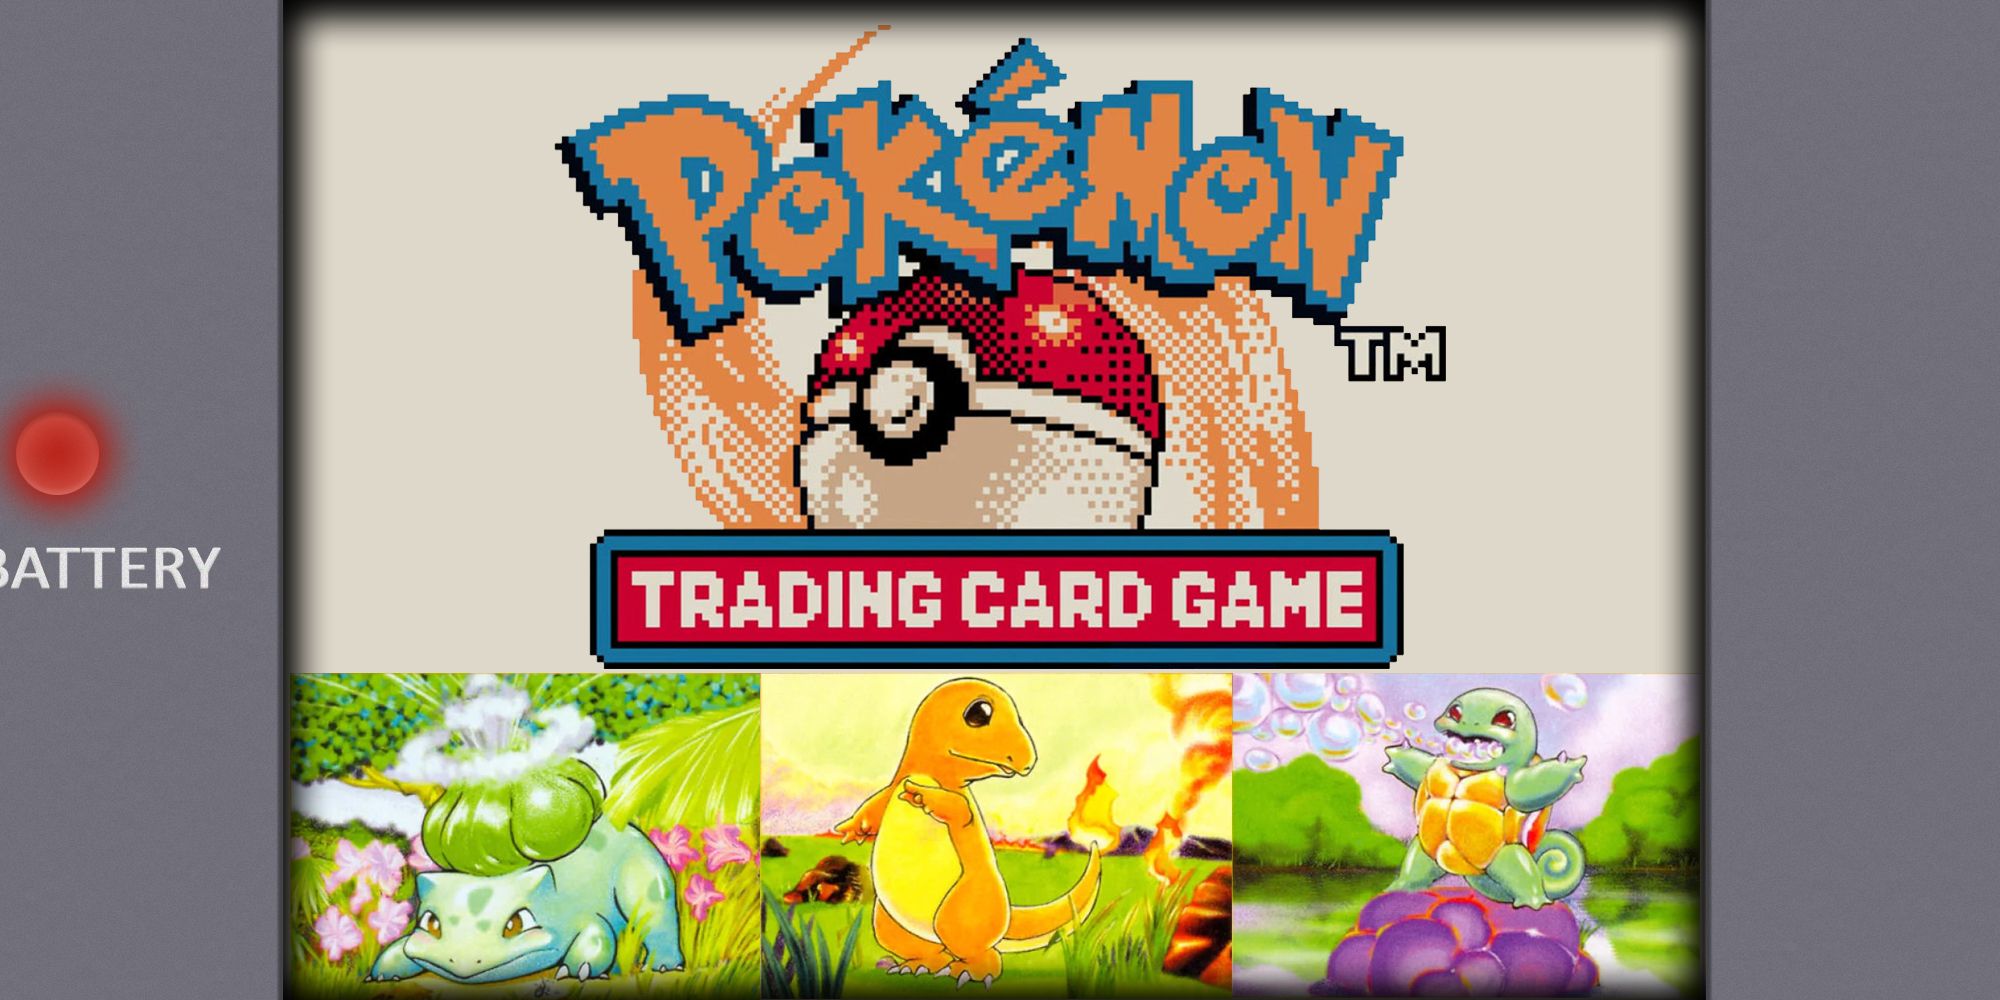 Pokemon Trading Card Game framed with a Game Boy border featuring card art of Bulbasaur, Charmander, and Squirtle